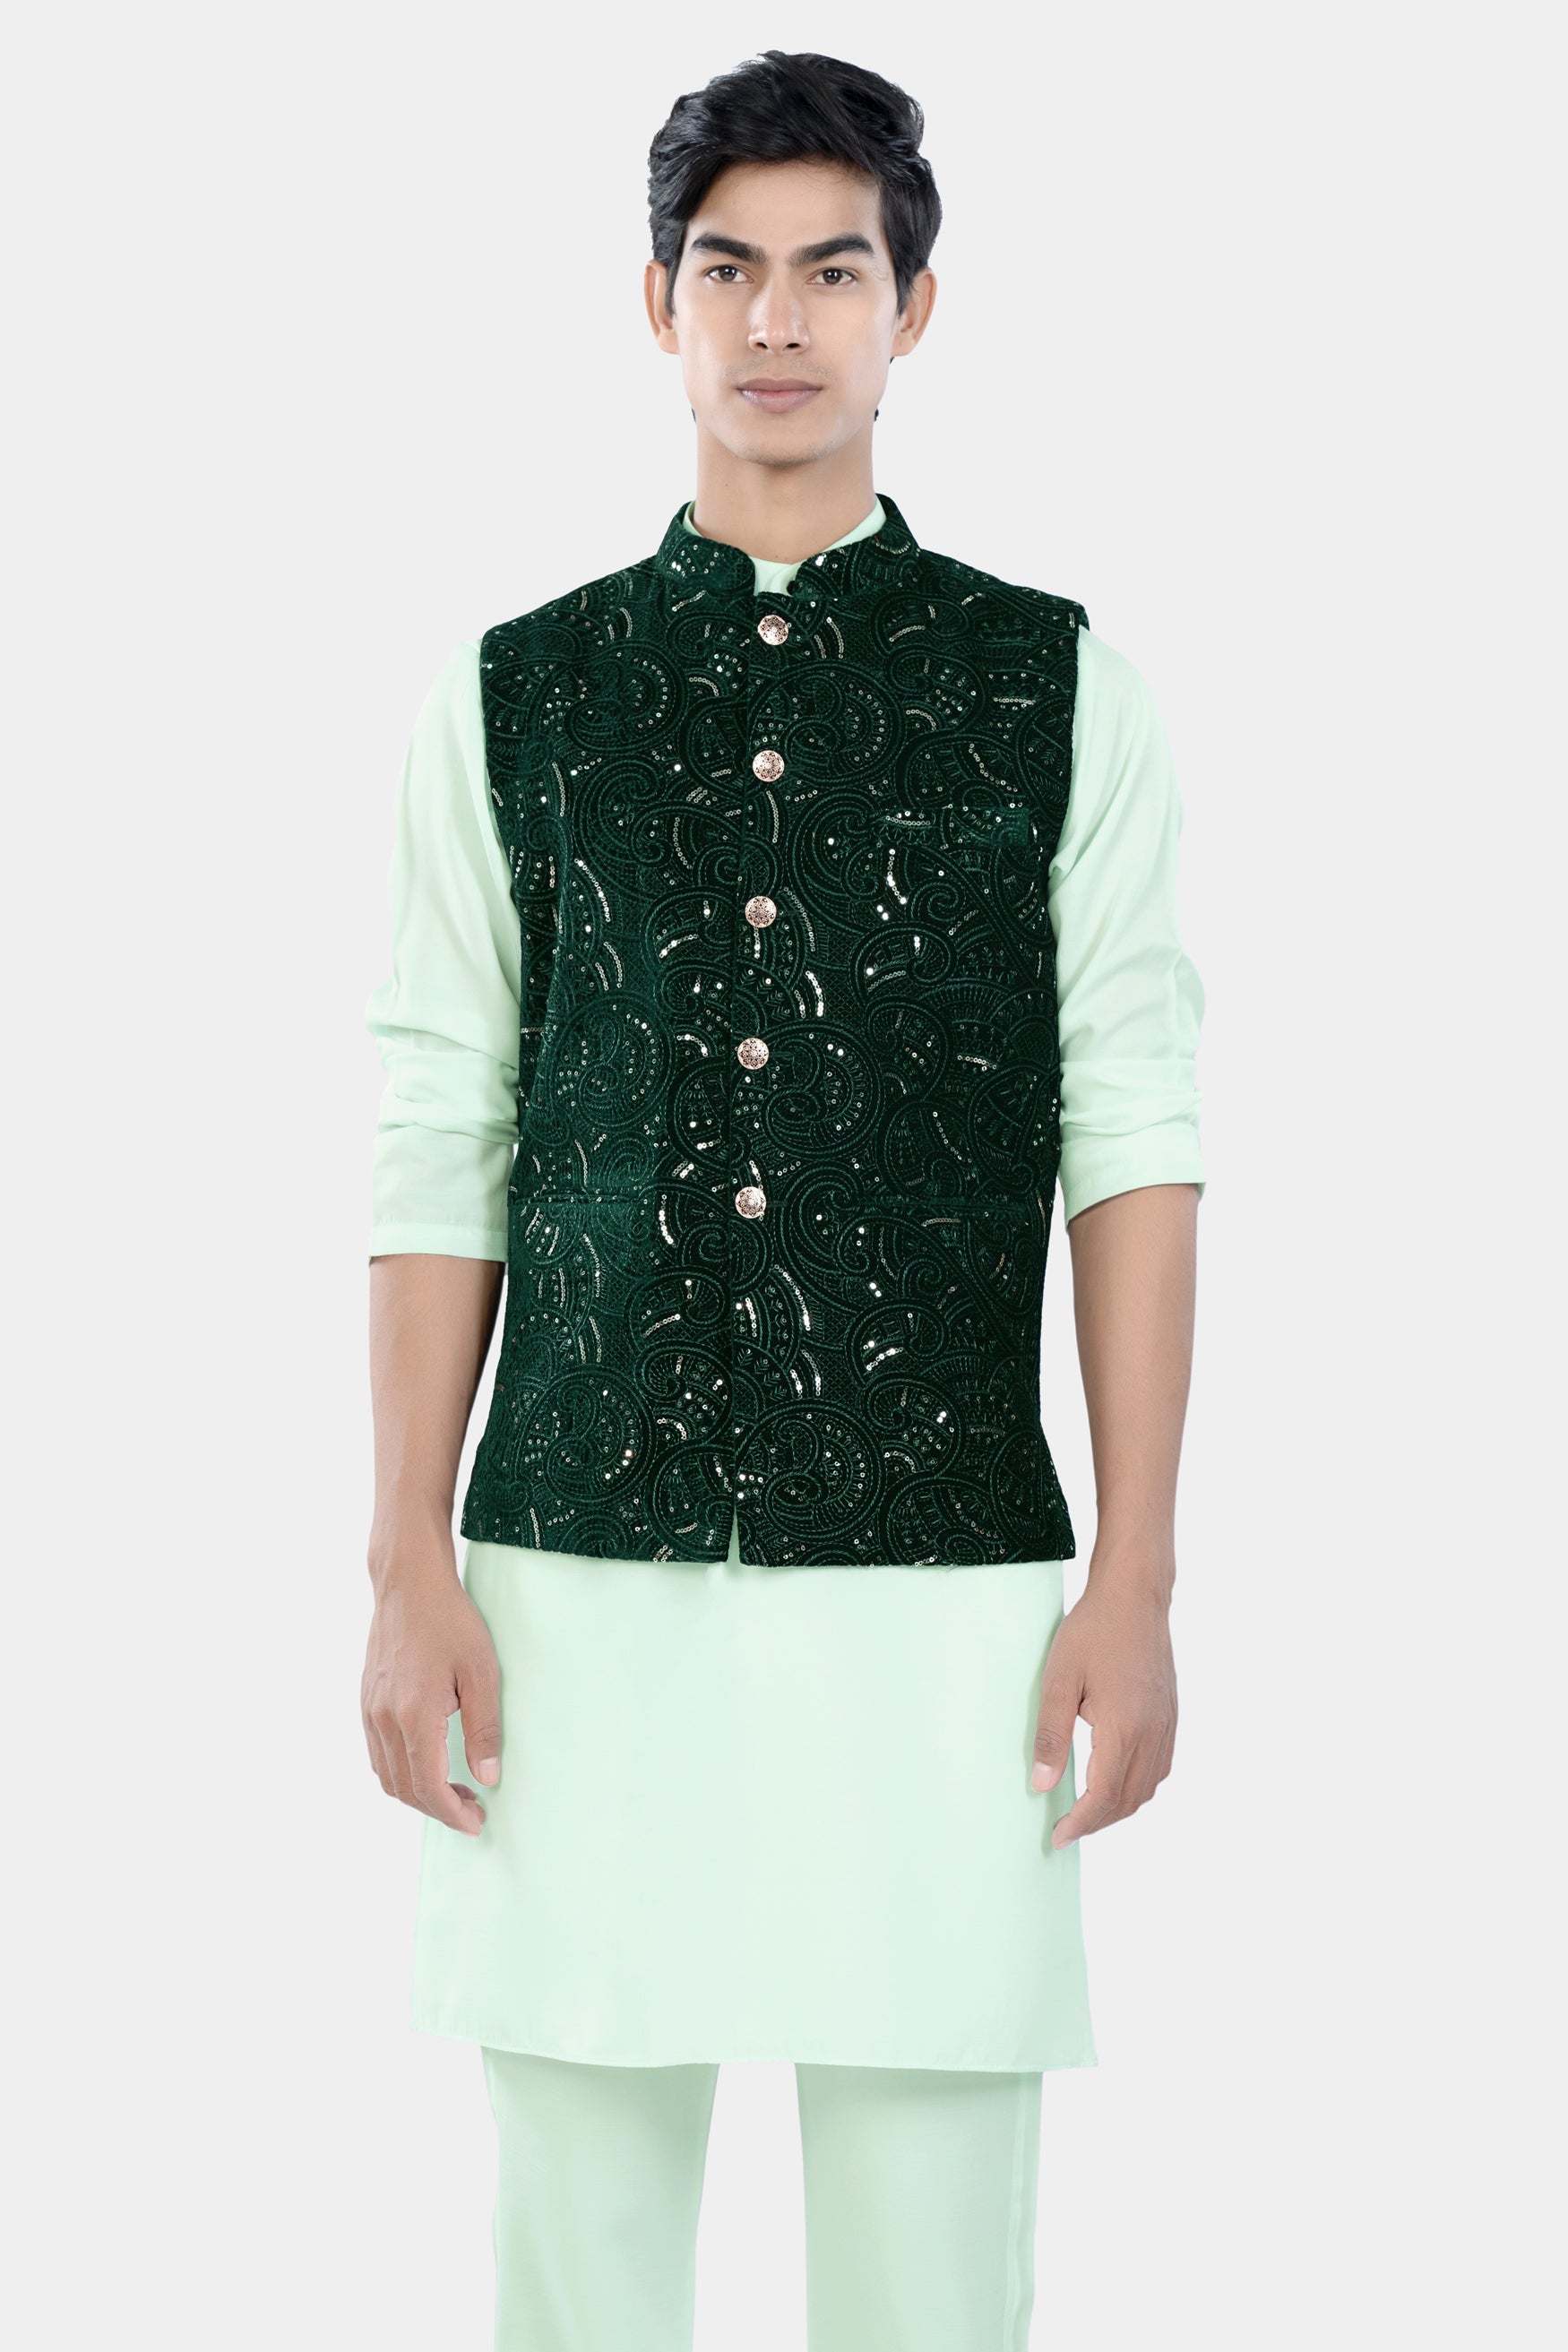 Periglacial Green Kurta Set with Palm and Jewel Green Sequin and Thread Embroidered Designer Nehru Jacket KPNJ024-44,  KPNJ024-46,  KPNJ024-48,  KPNJ024-50,  KPNJ024-52,  KPNJ024-54,  KPNJ024-56,  KPNJ024-58,  KPNJ024-60